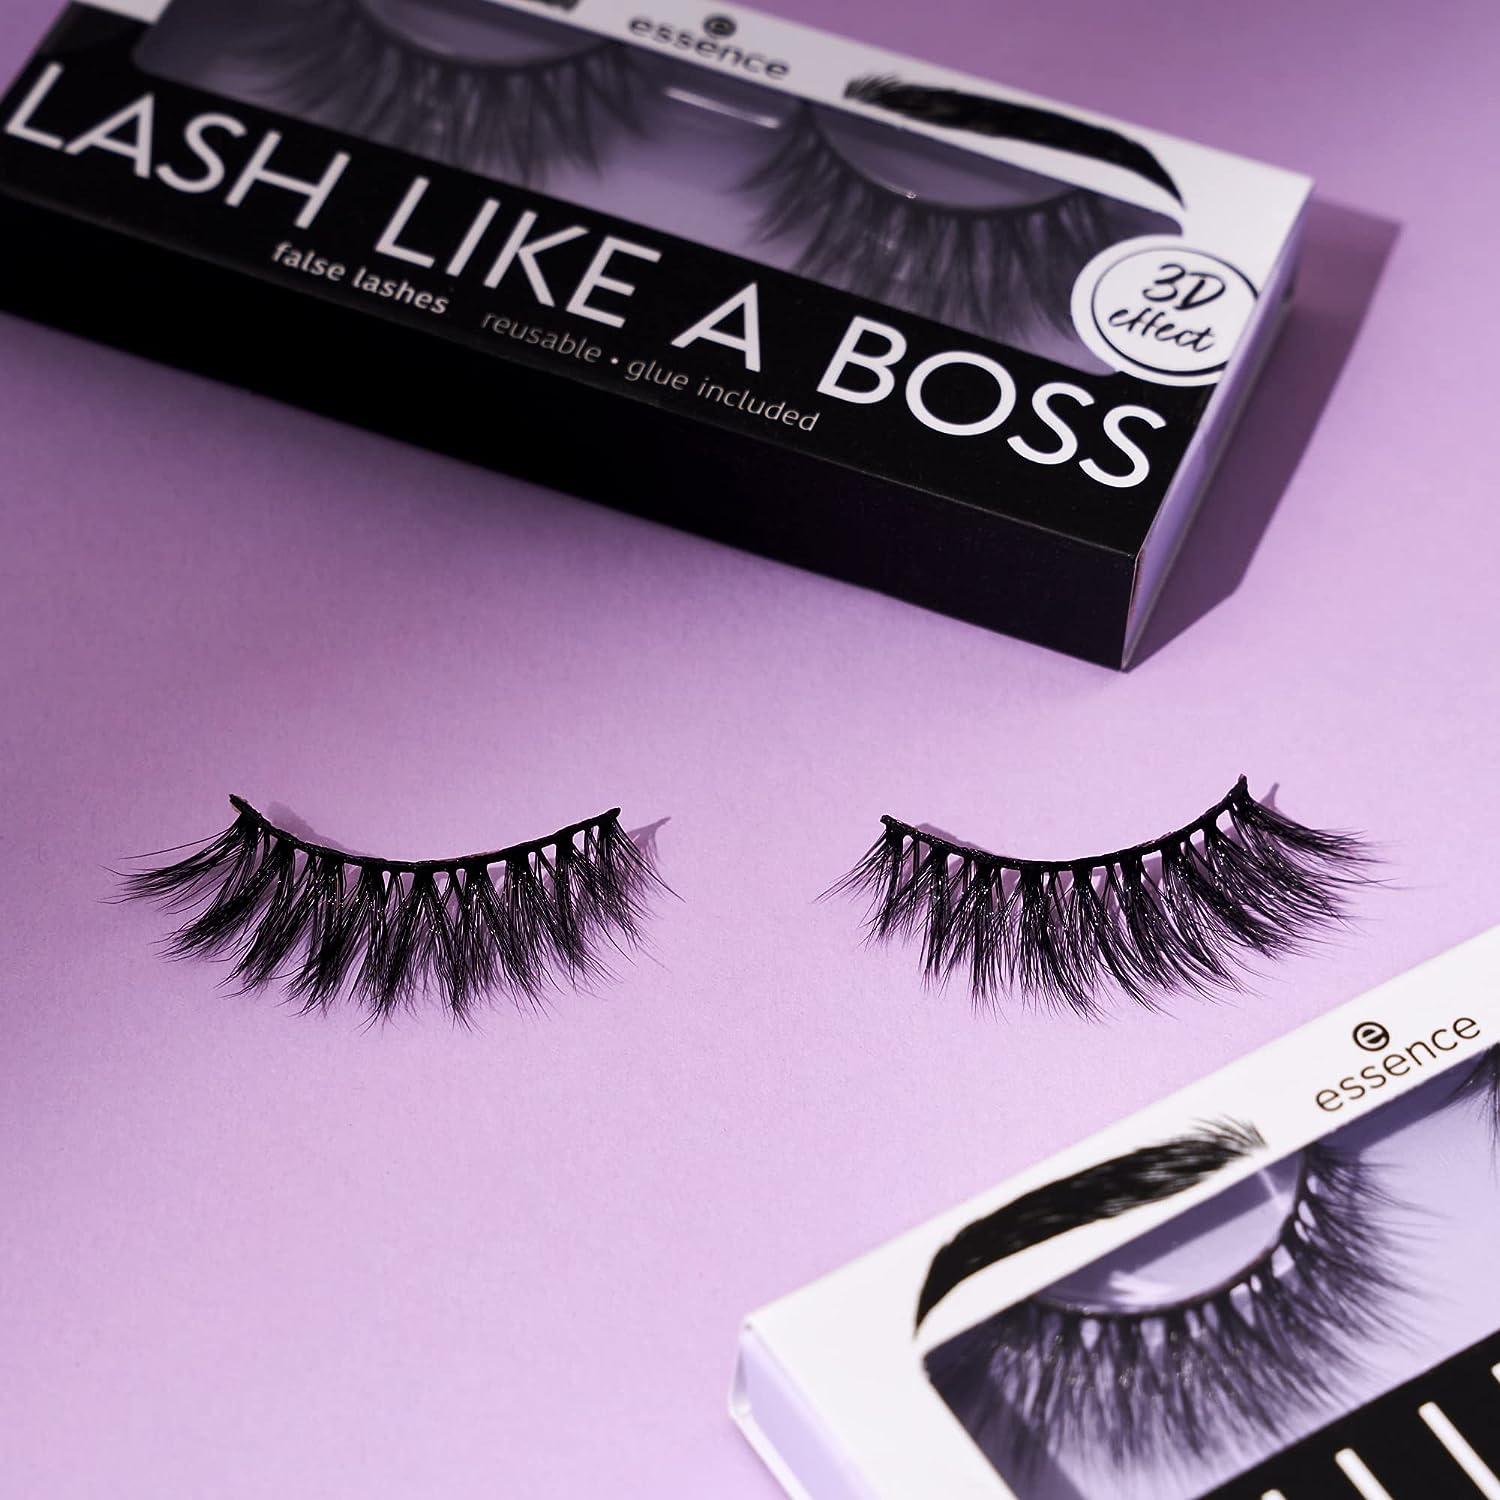 essence | Lash Like A Boss False Lashes | Reusable 3D Lashes with Long  Lasting Lash Glue | Vegan & Cruelty Free | Free From Parabens Oil & Alcohol  (02 | Limitless)